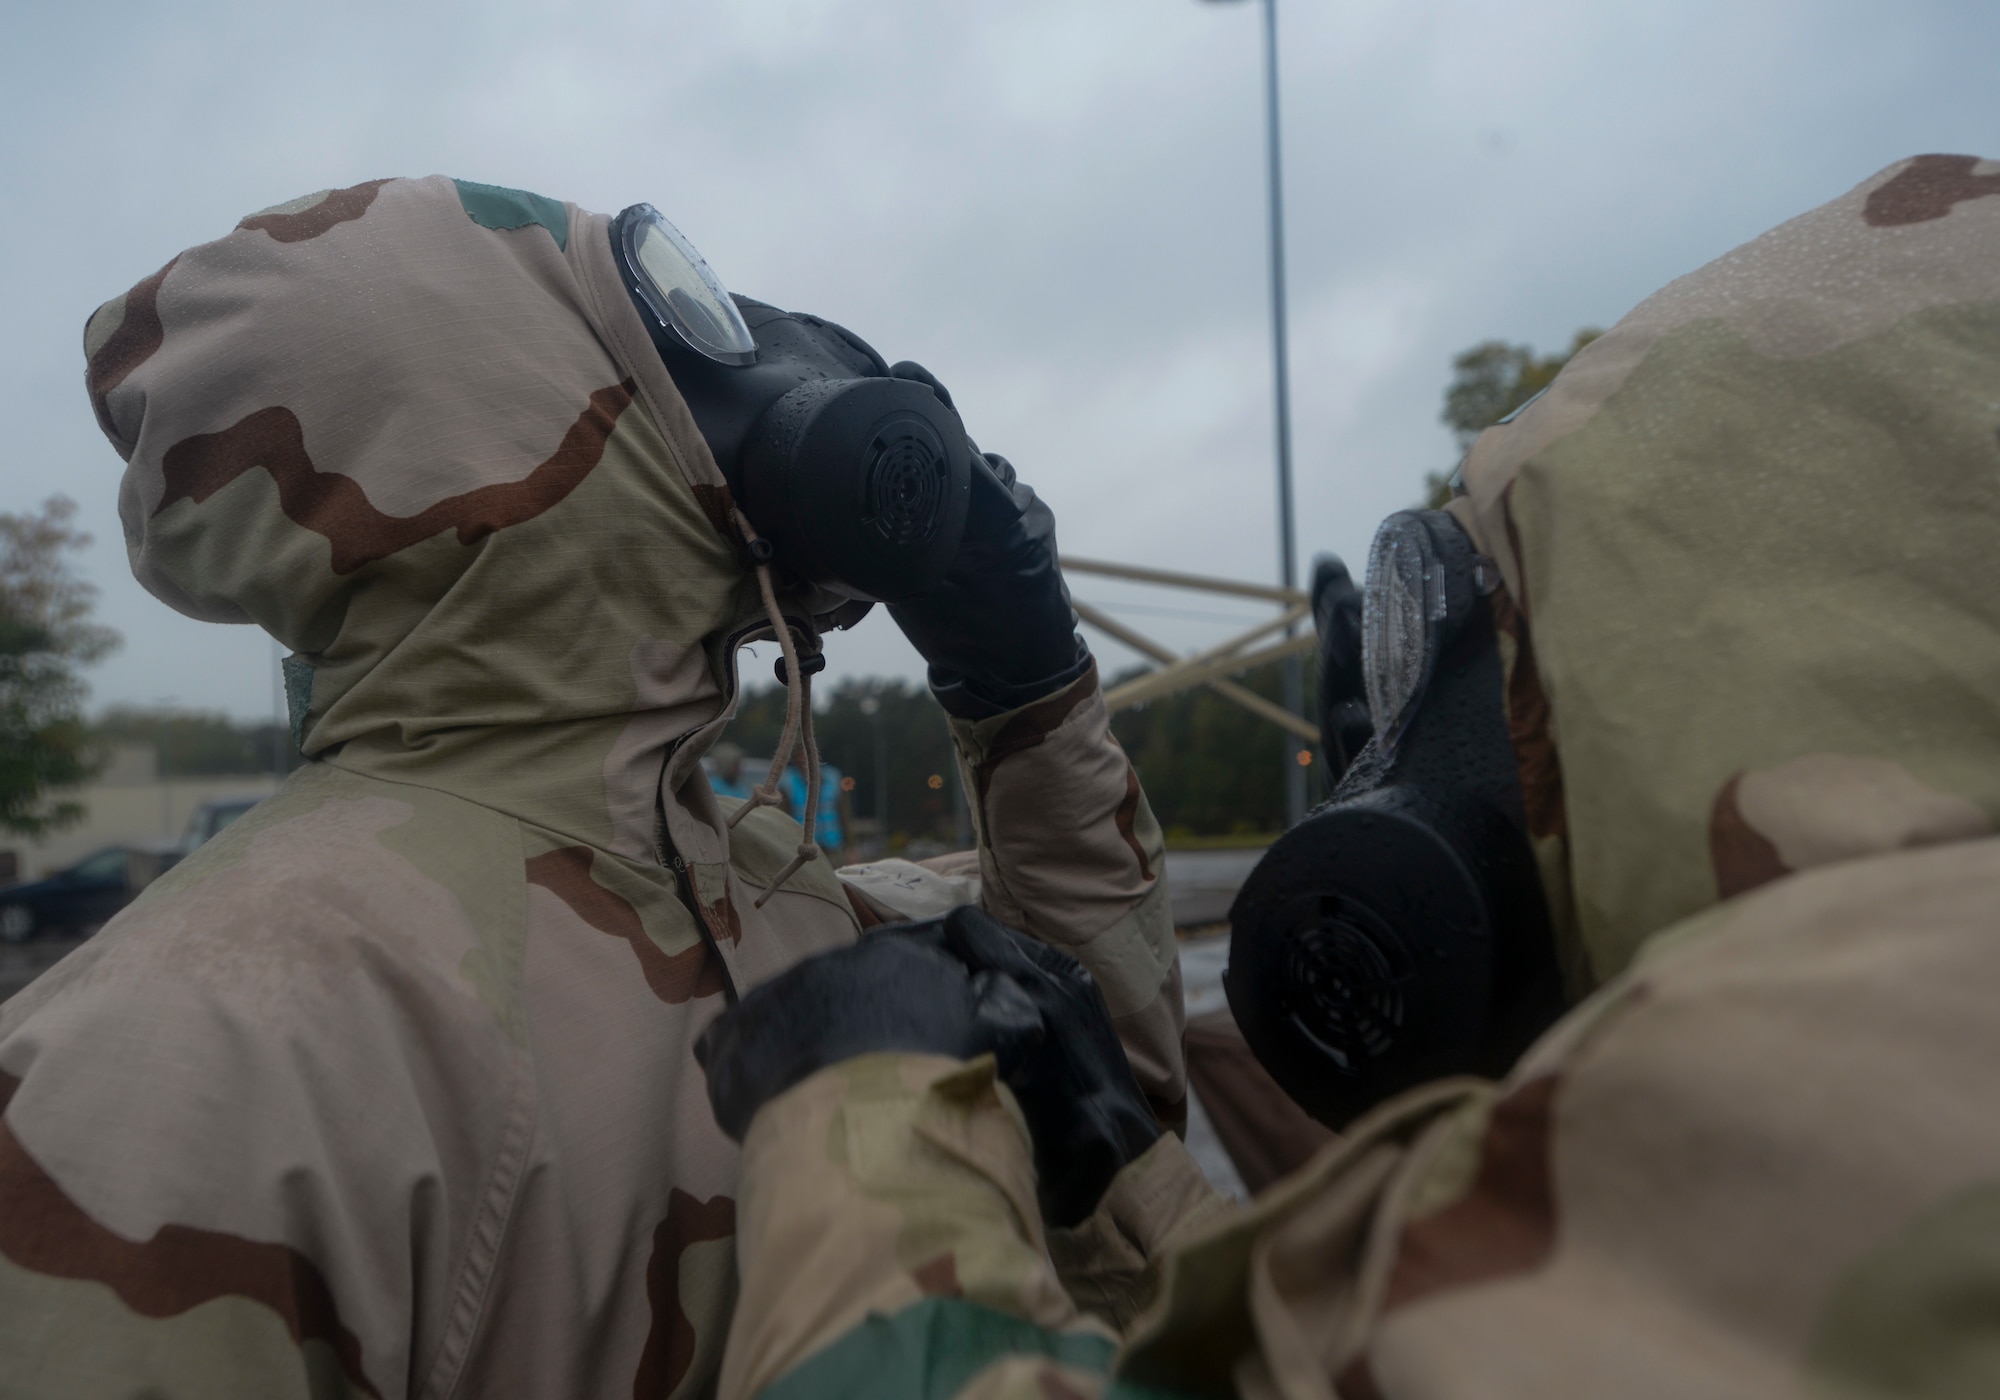 U.S. Airmen assist each other to remove their mission-oriented protective posture gear as part of Operation Varsity 19-03 at Ramstein Air Base, Germany, Sept. 27, 2019. Airmen assigned to both the 86th Airlift Wing and 521st Air Mobility Operations Wing simulated decontaminating their equipment to become more familiar with the process. (U.S. Air Force photo by Tech. Sgt. Timothy Moore)